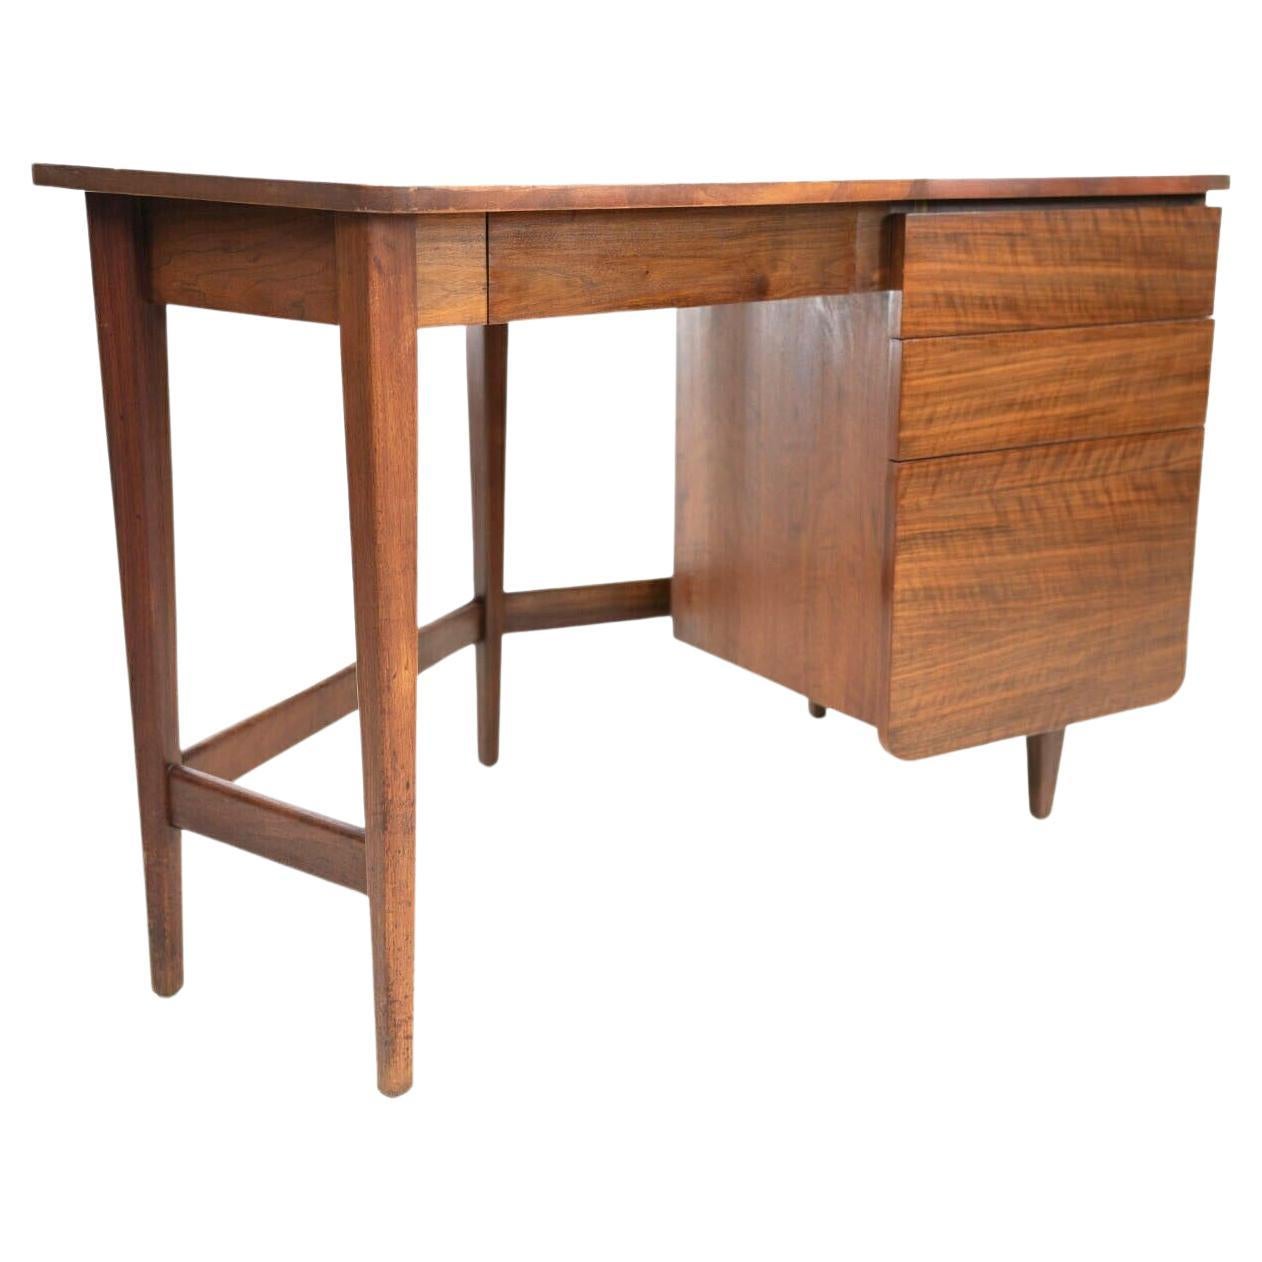 Danish teak mid century corner desk

A teak mid-century boomerang style six-sided corner desk. 

Clean minimal mid-century lines. Featuring a hidden drawer under the desktop and a further three drawers to the righthand side. The lower drawer is